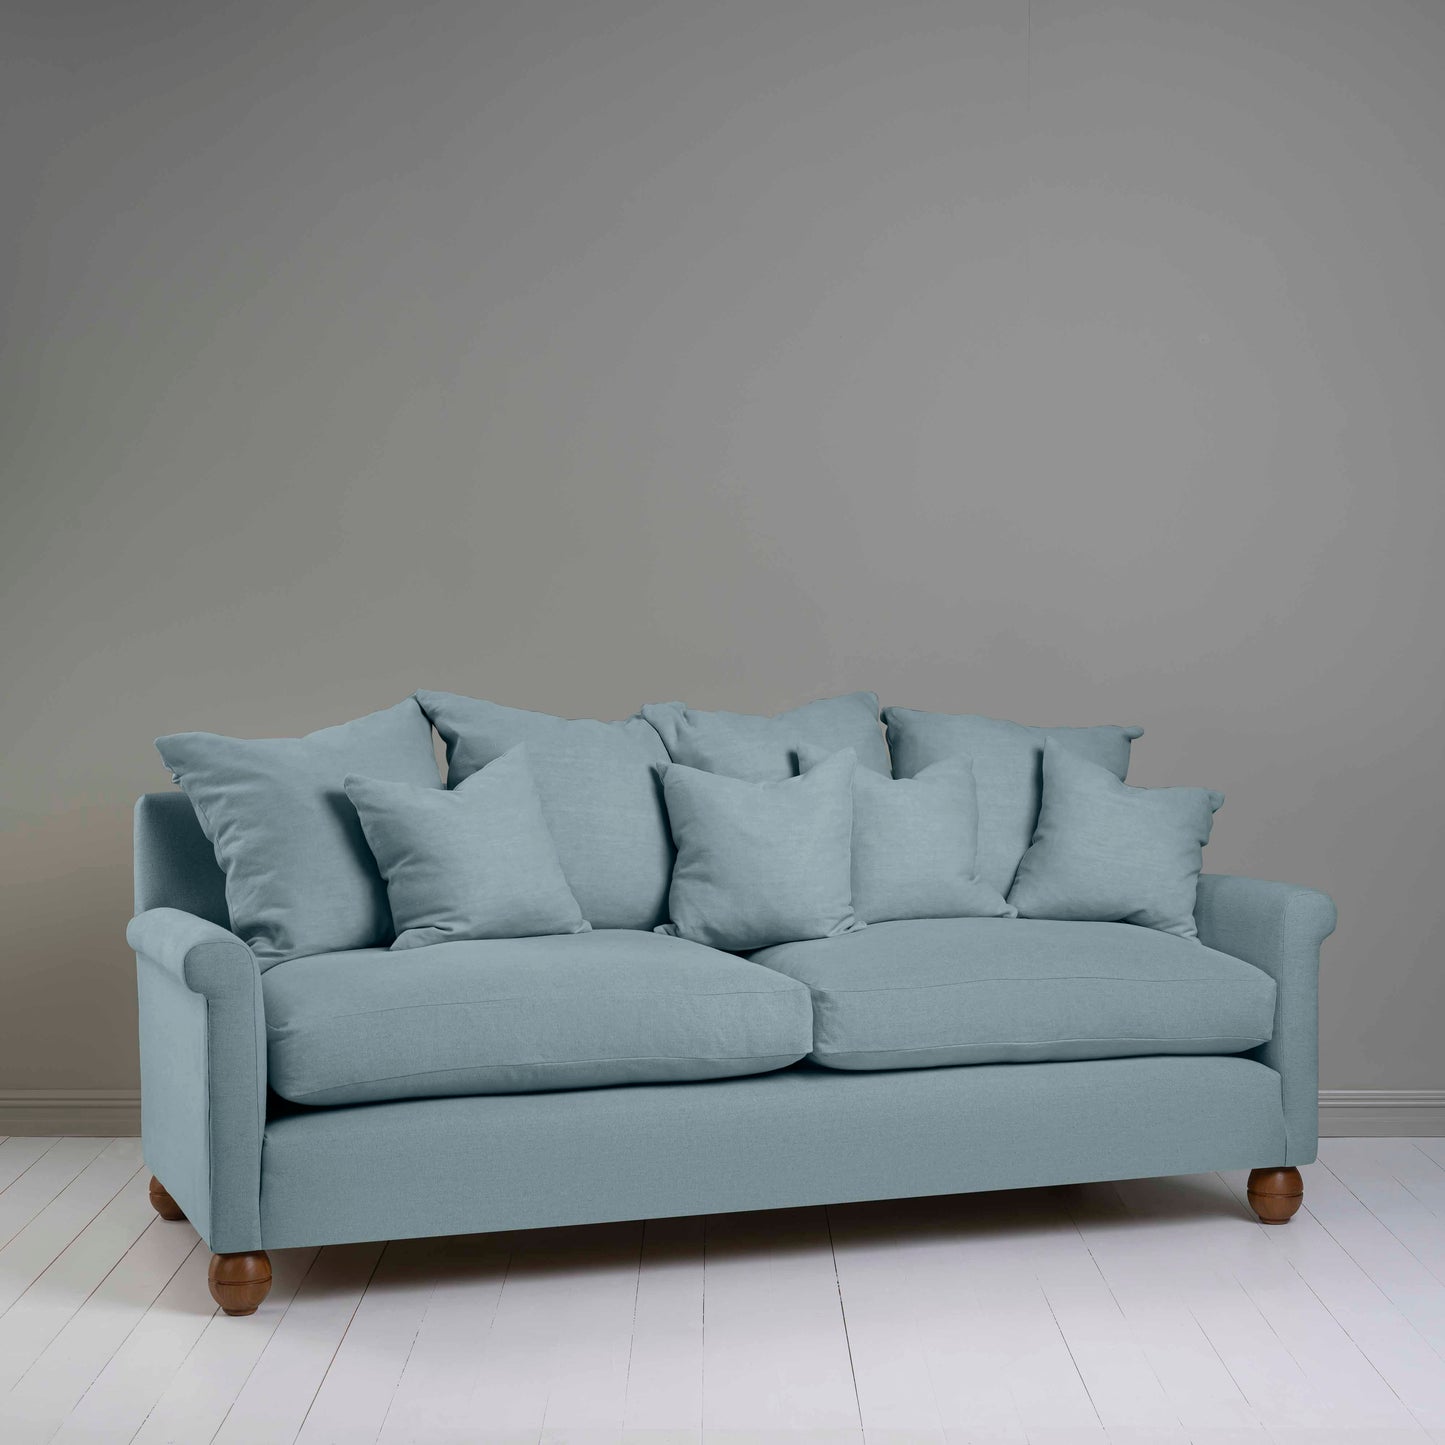 Idler 4 seater sofa in Laidback Linen Cerulean